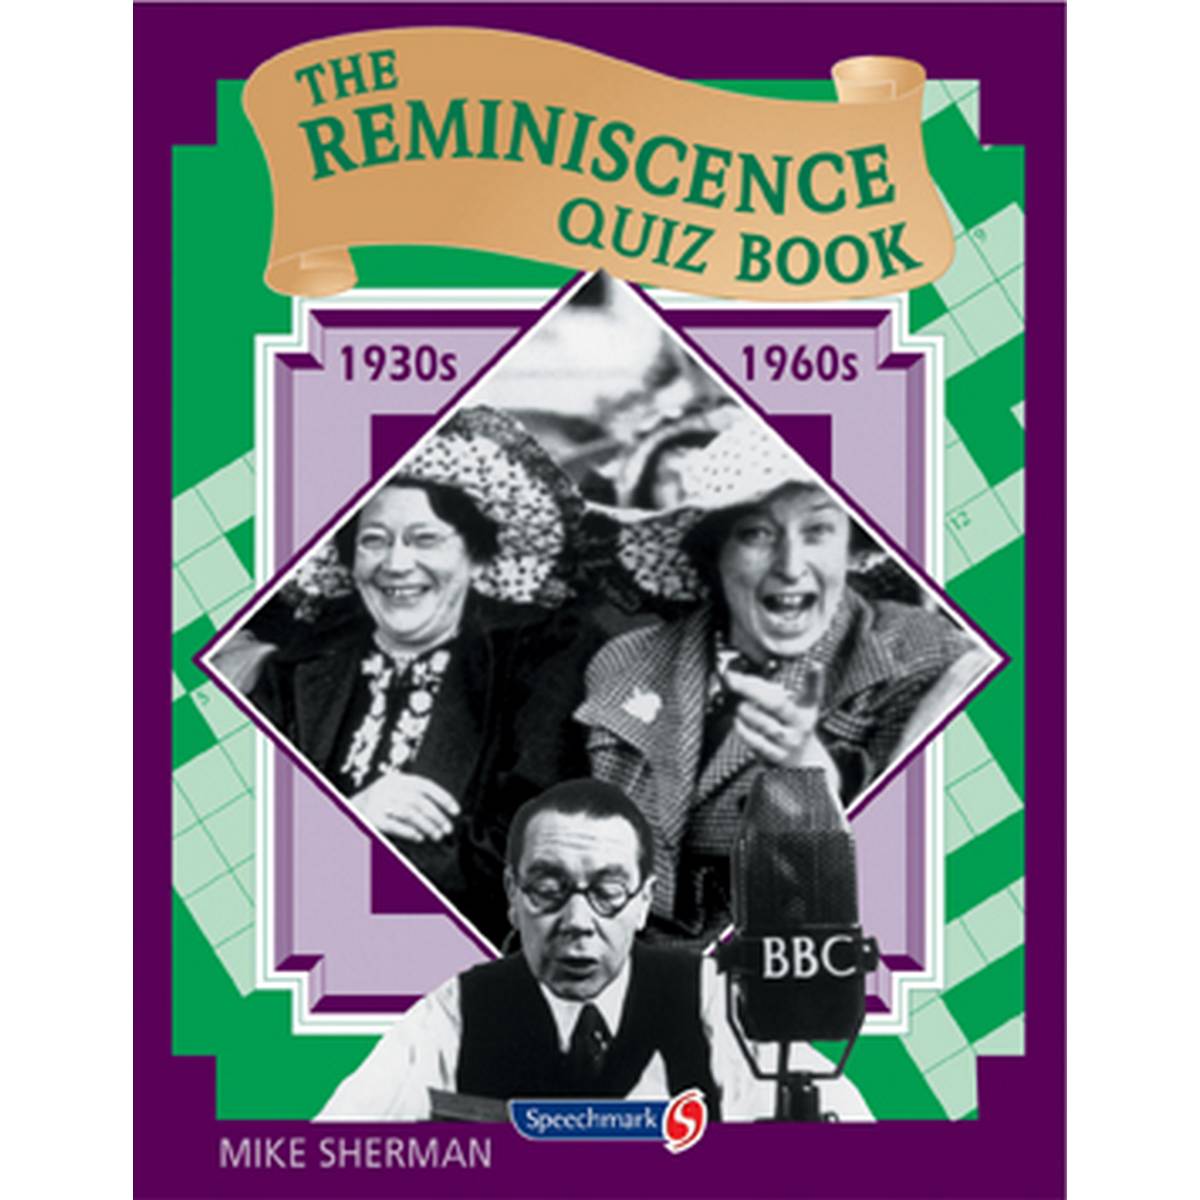 Reminiscence Quiz Book, The